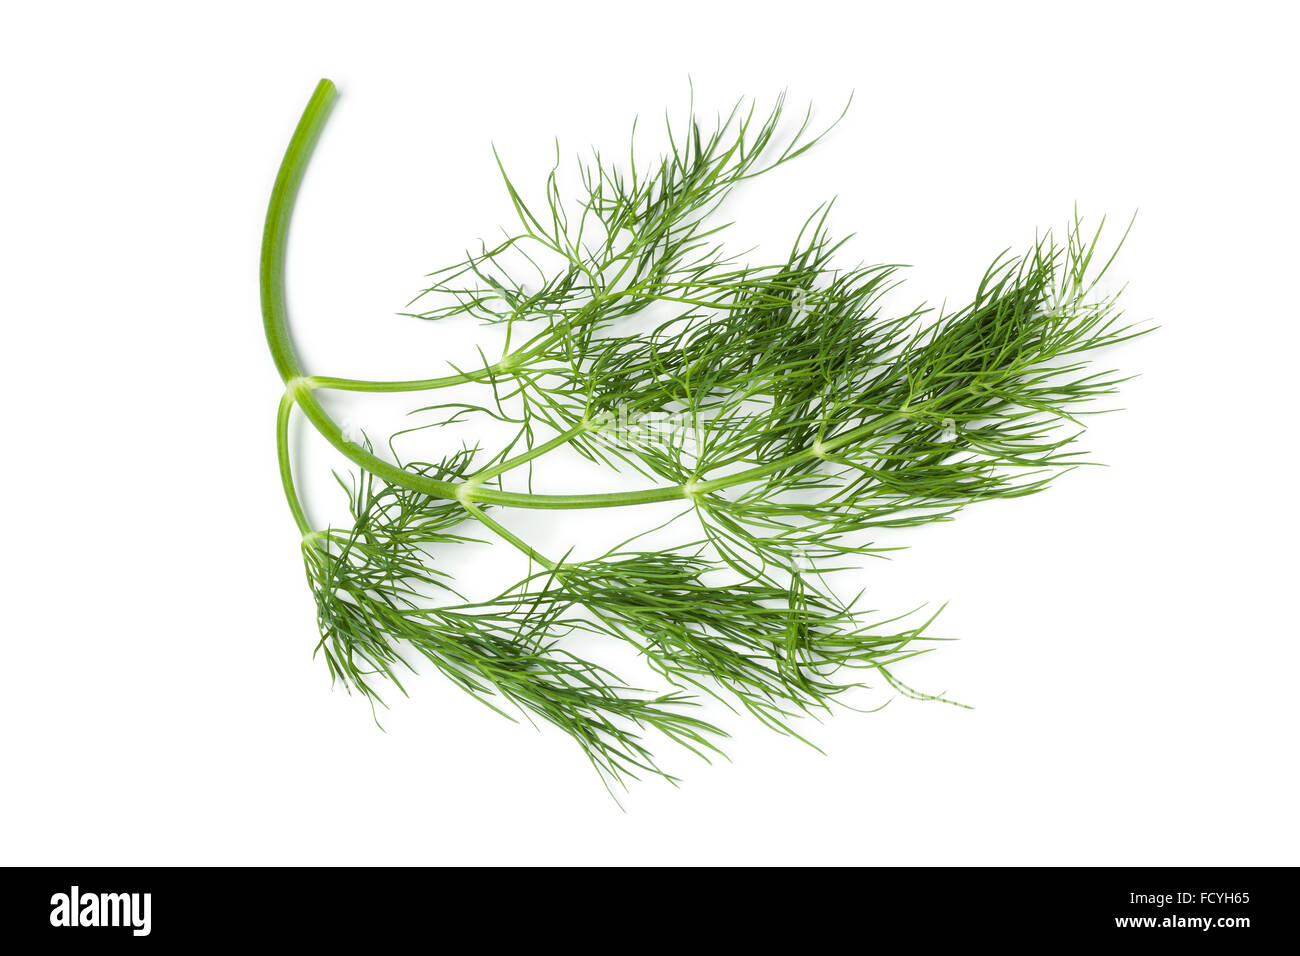 Twig of fresh green dill on white background Stock Photo